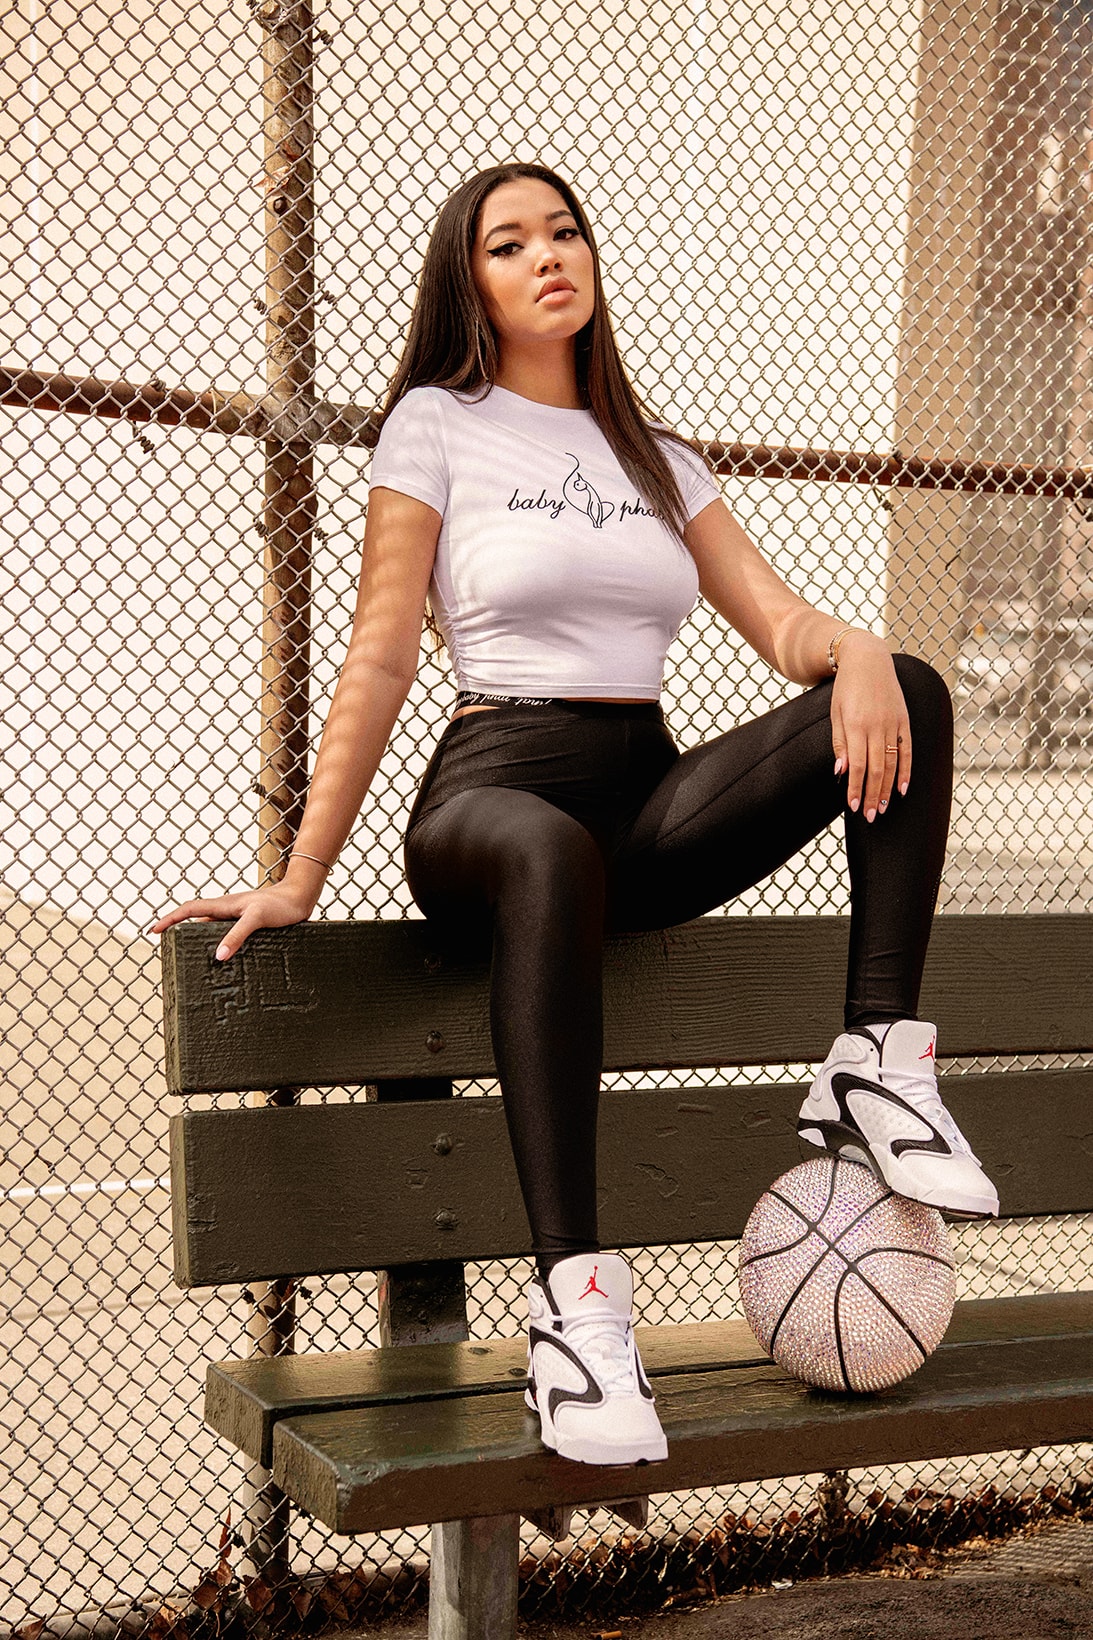 baby phat foot locker courtside capsule collaboration ming lee simmons tank catsuit red one shoulder dress sneakers